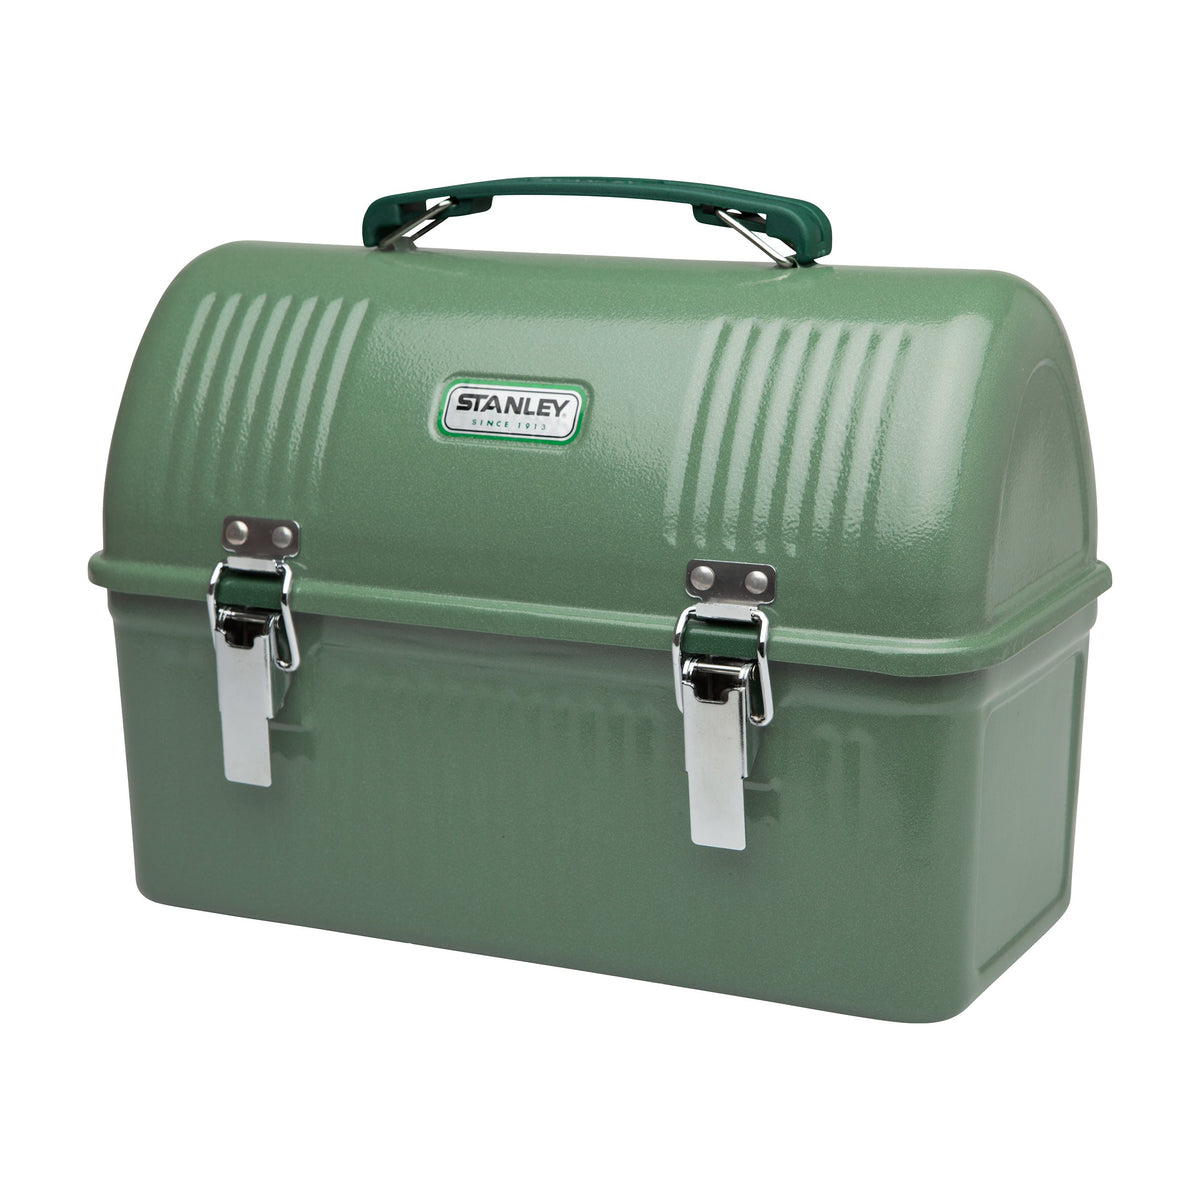 Stanley Classic Steel 10qt Lunch Box - Hammer Tone Navy - Large Outdoor Food